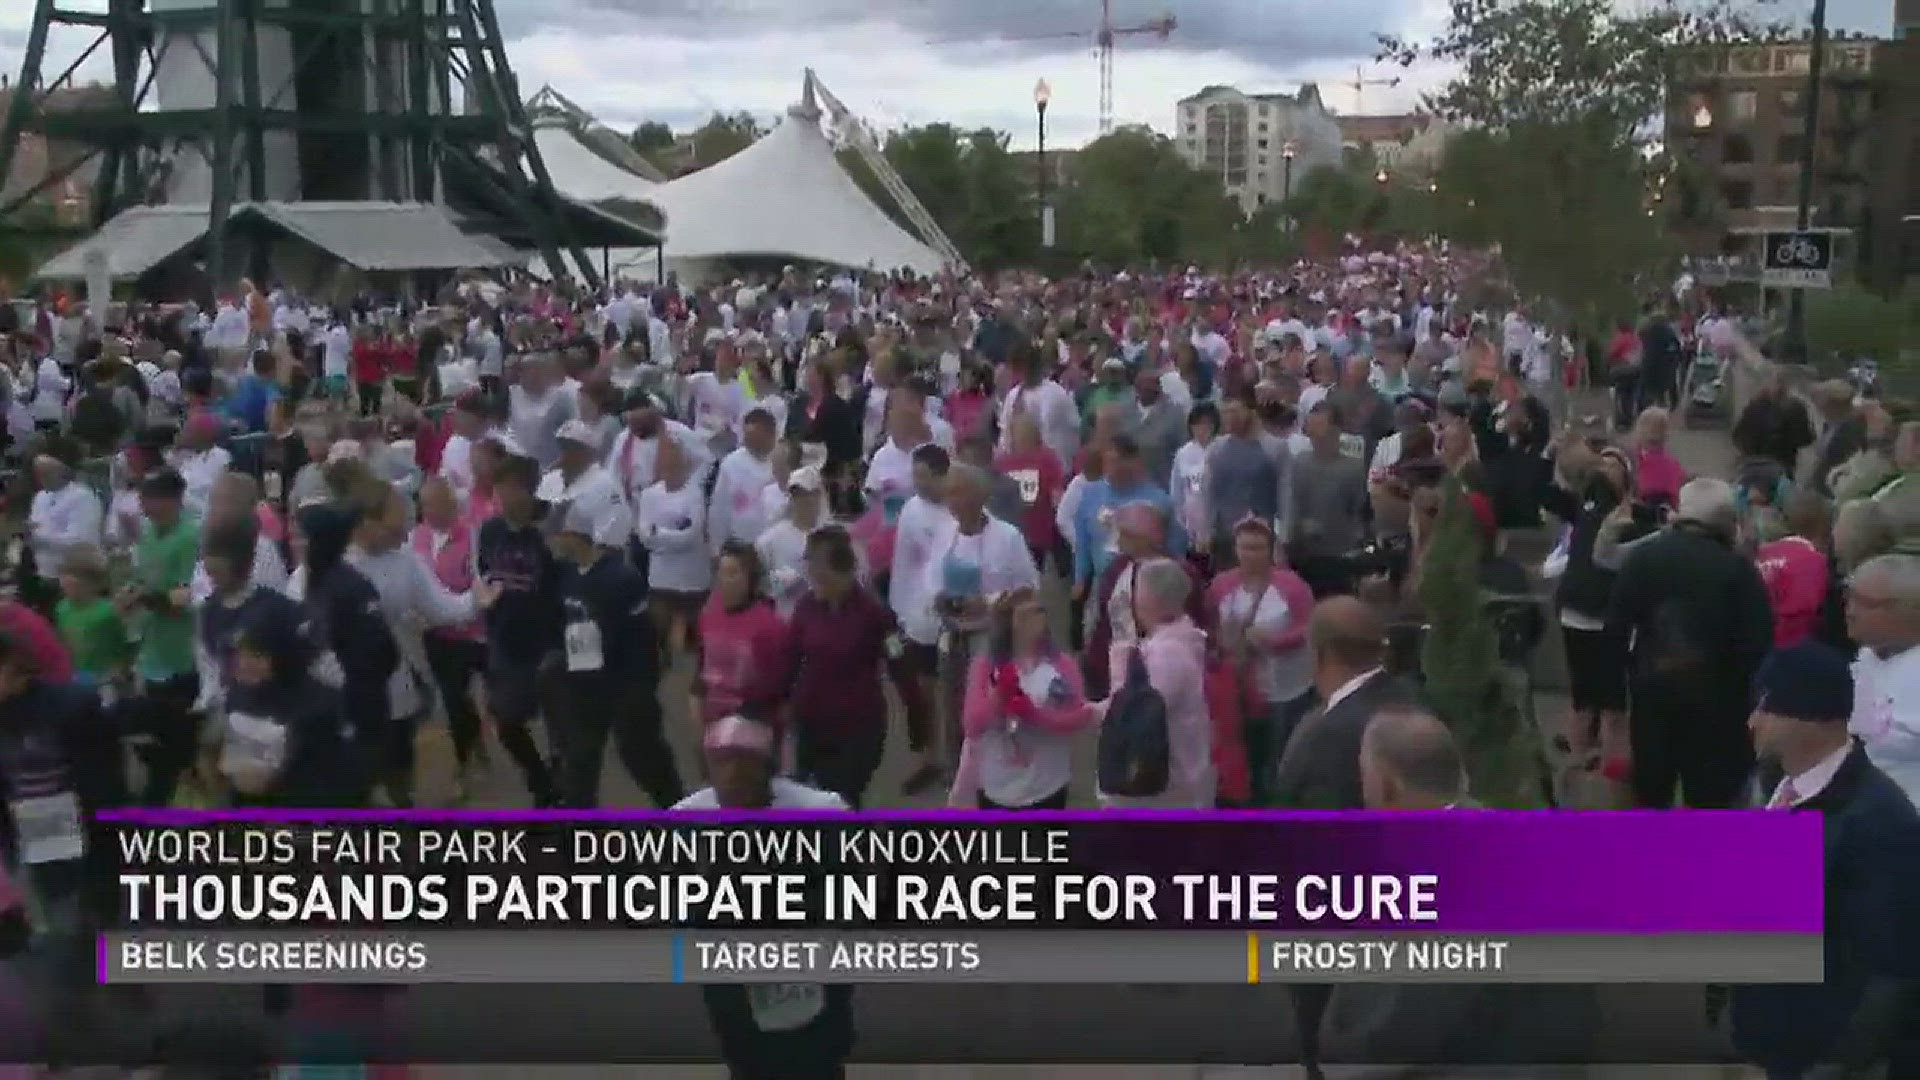 Oct. 22, 2016: Thousands of people walked or ran to raise awareness for the fight against breast cancer during the 20th annual Komen Knoxville Race for the Cure.